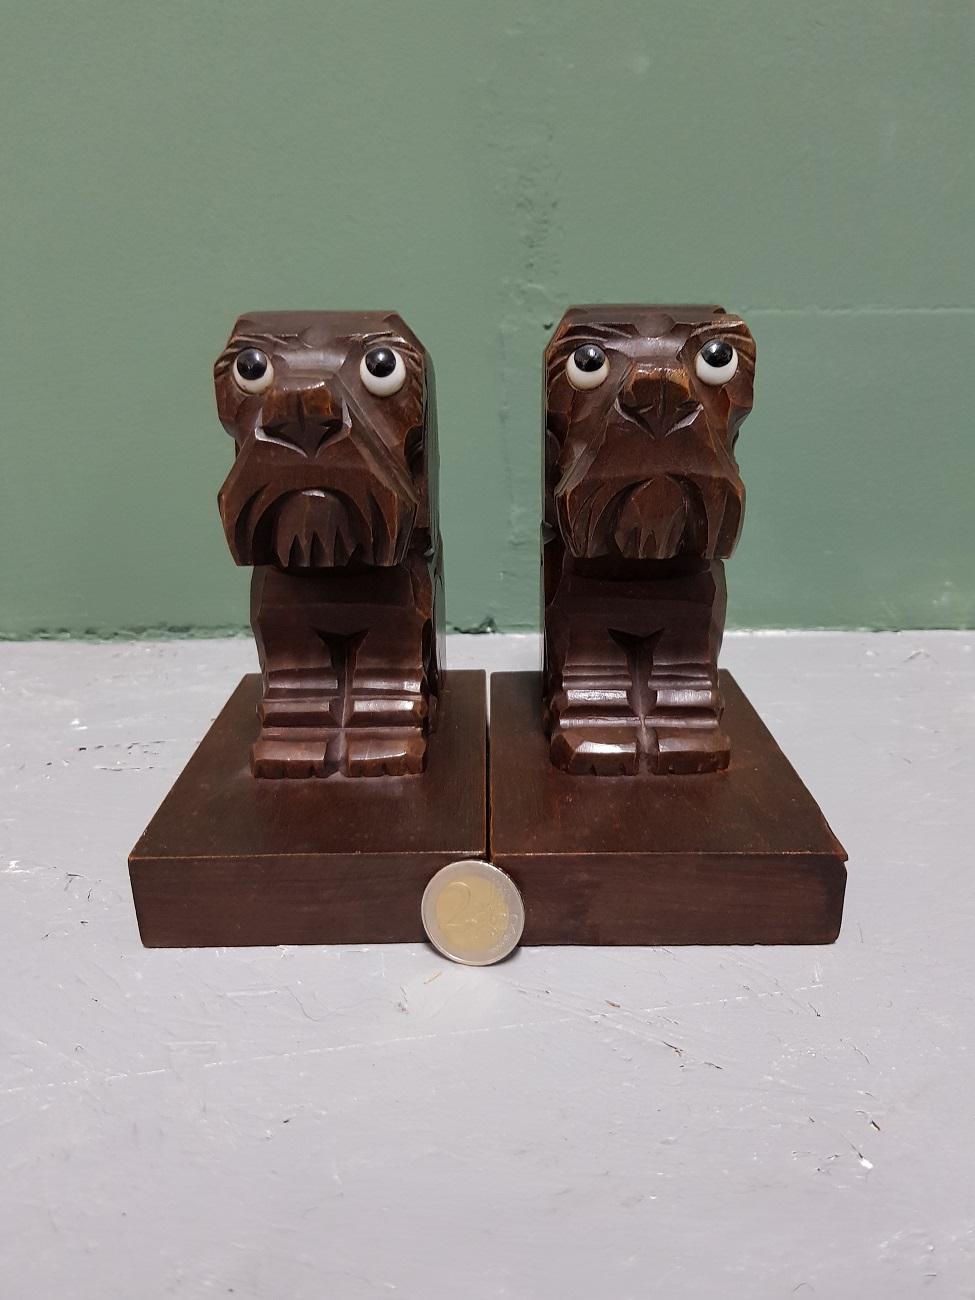 A pair of vintage hand carved wooden bookends in the shape of sitting dogs, both in good condition and made in the 1960s.

The measurements are:
Depth 9 cm/ 3.5 inch.
Width 13 cm/ 5.1 inch.
Height 15 cm/ 5.9 inch.